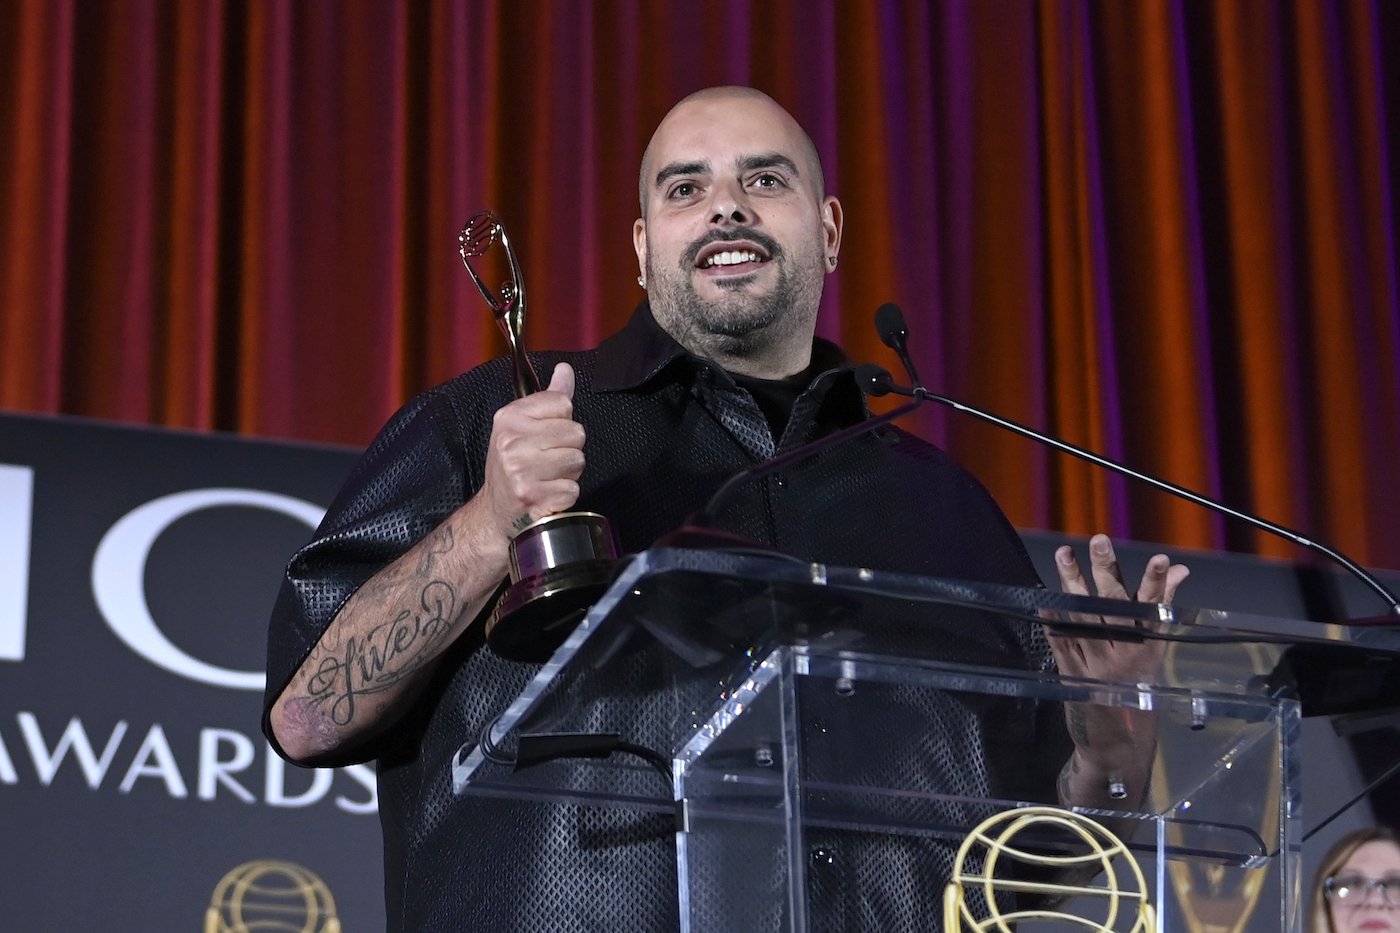 Berner attends the Clio Cannabis Awards at Thursday, Sept. 29, 2022, in Las Vegas. (